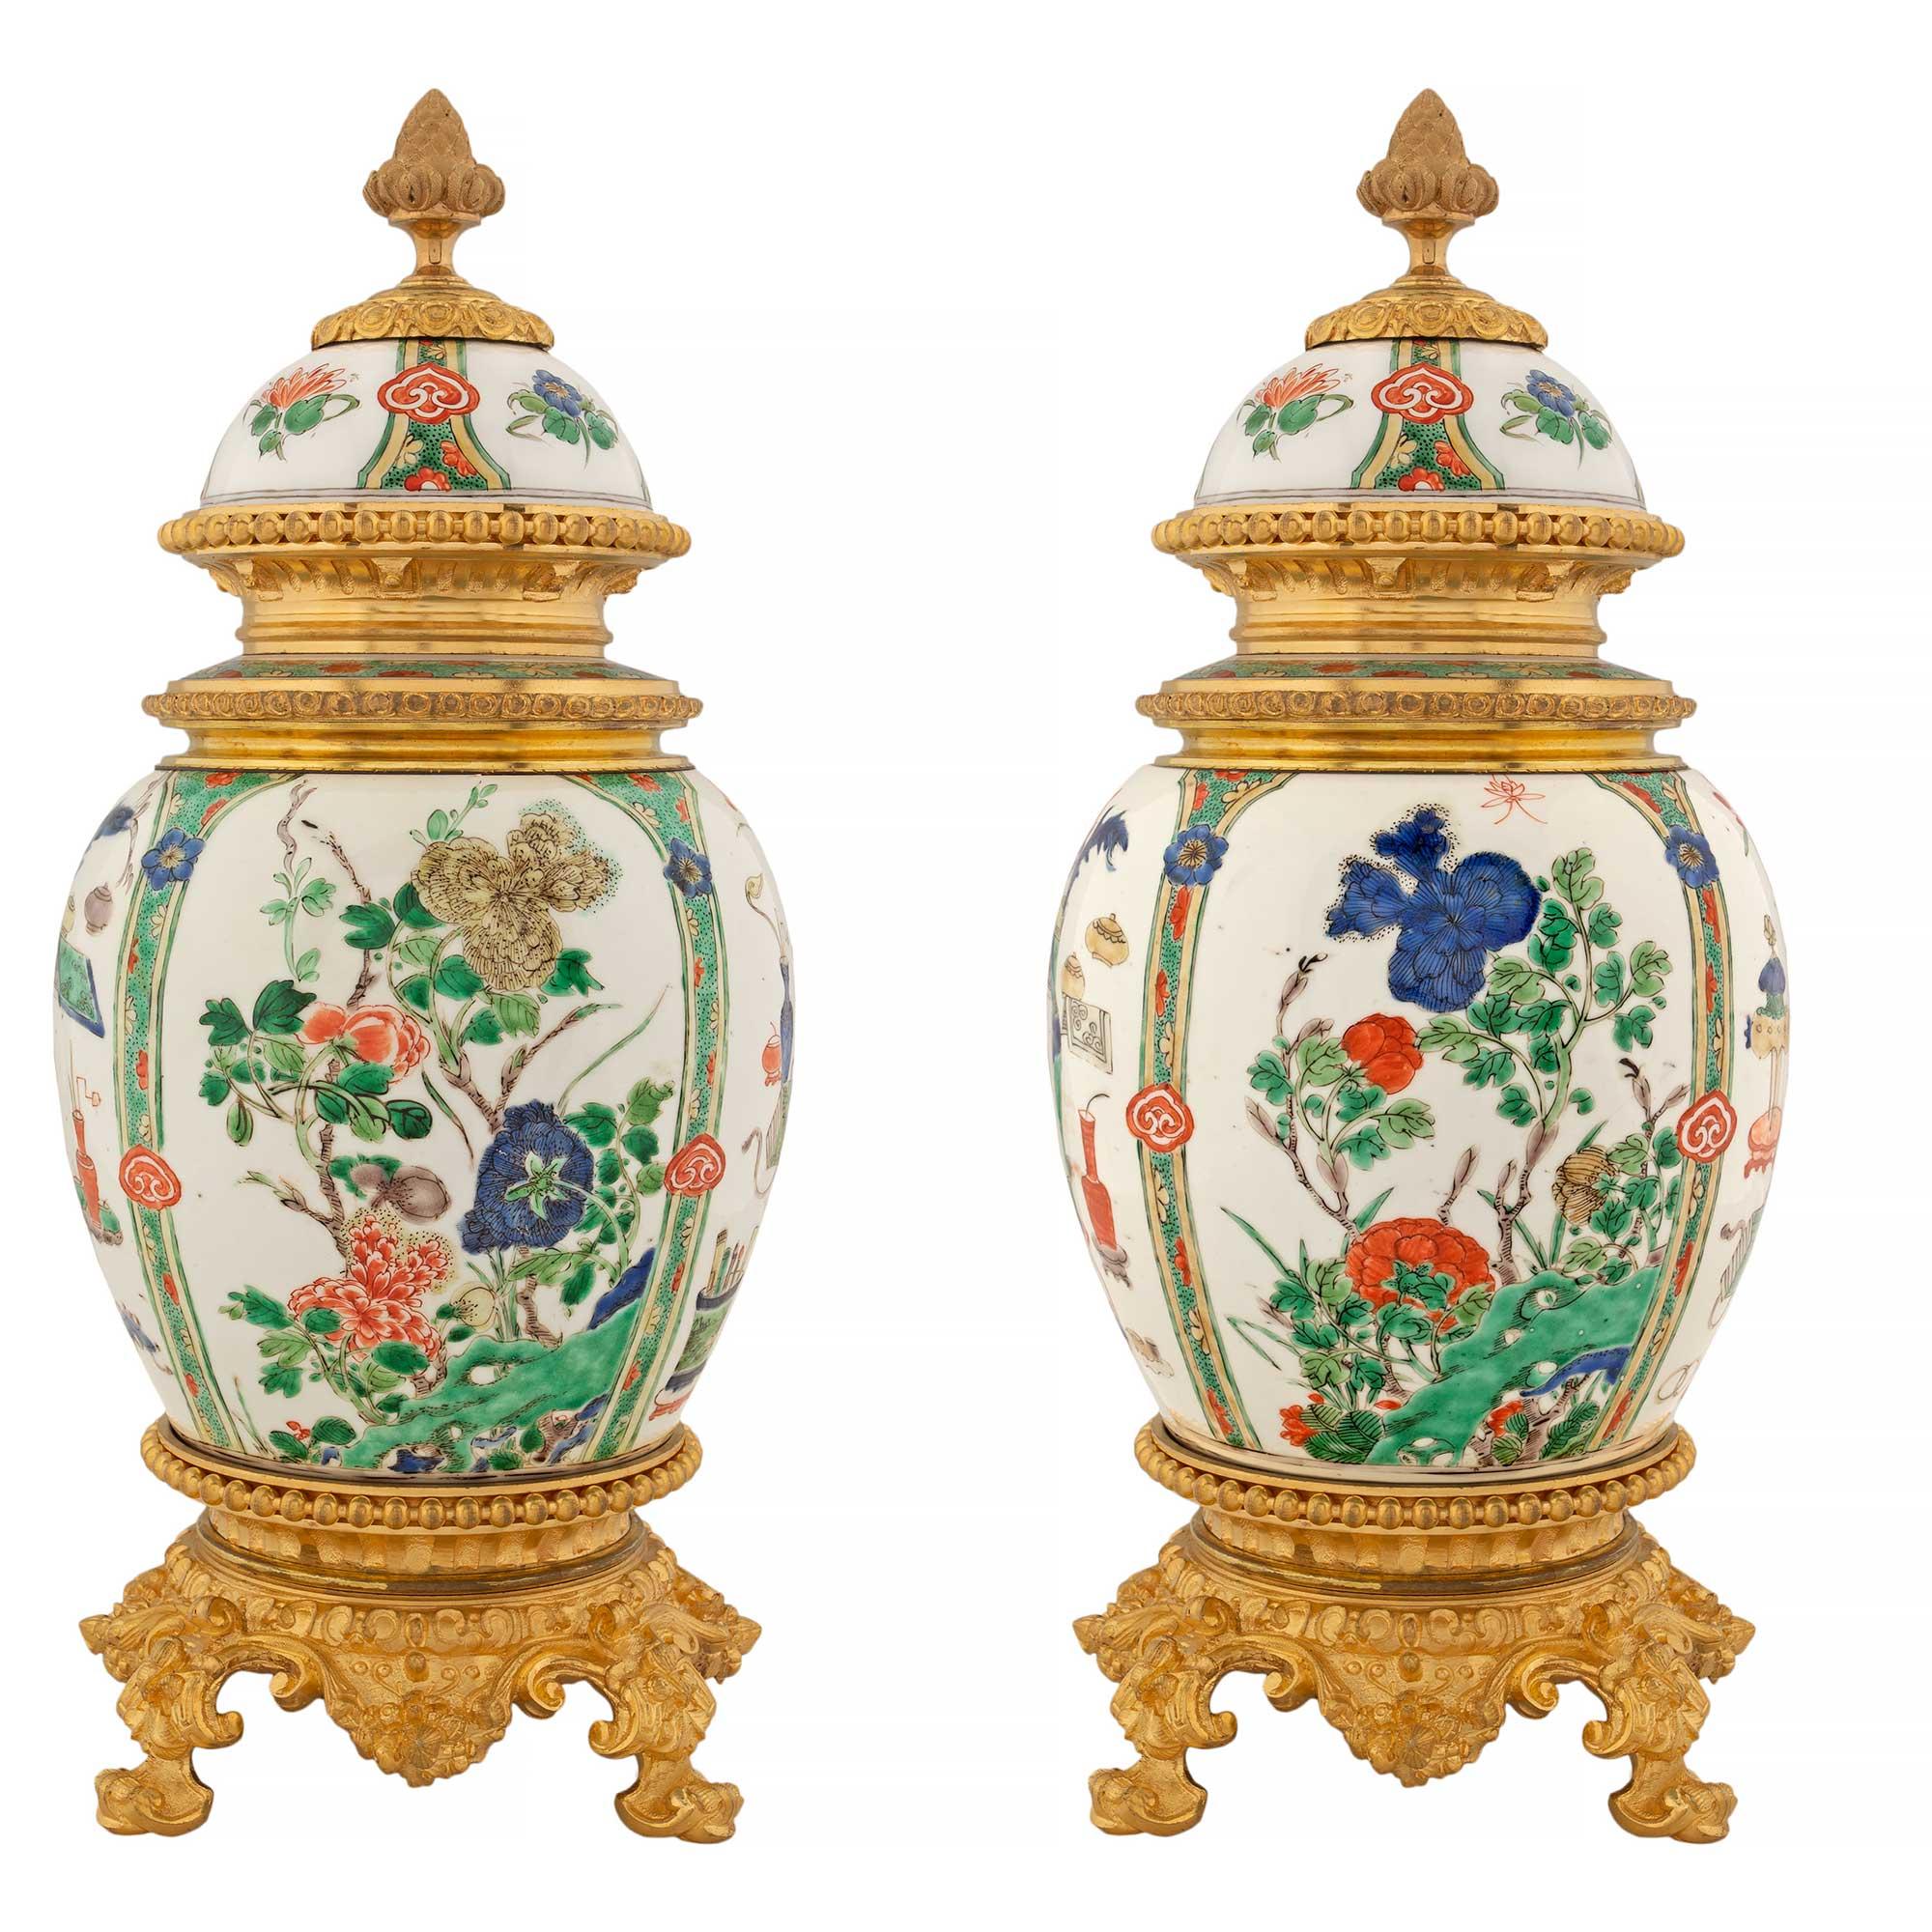 A very fine pair of 19th century Chinese Export porcelain lidded urns on French Louis XVI st. ormolu mounts. Each urn is raised by circular ormolu bases with scrolled supports below an elegant beaded band. Above is the handsome urn with floral